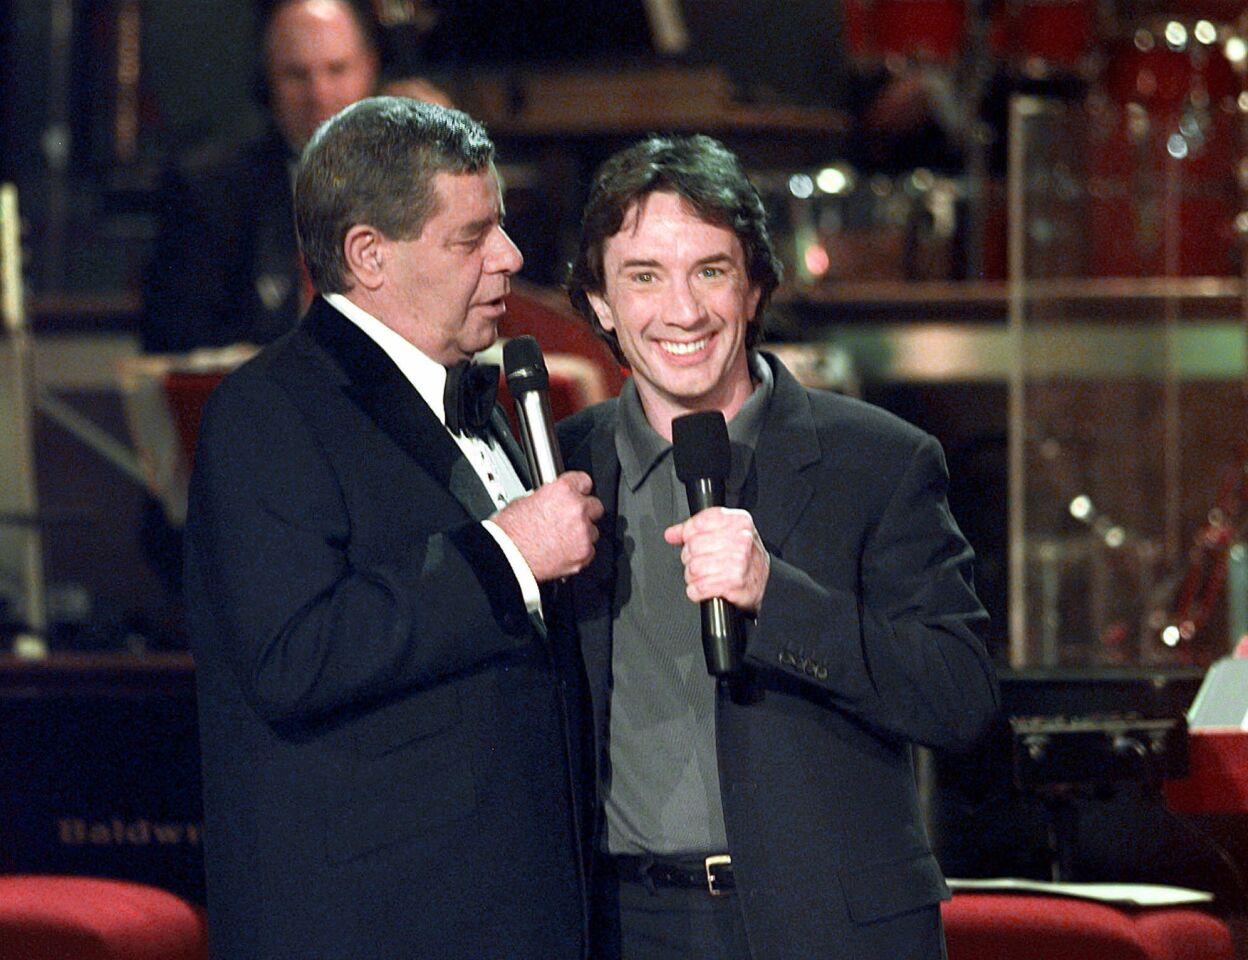 Jerry Lewis and Martin Short perform during the 34th Muscular Dystrophy Assn. Telethon in Los Angeles in 1999.